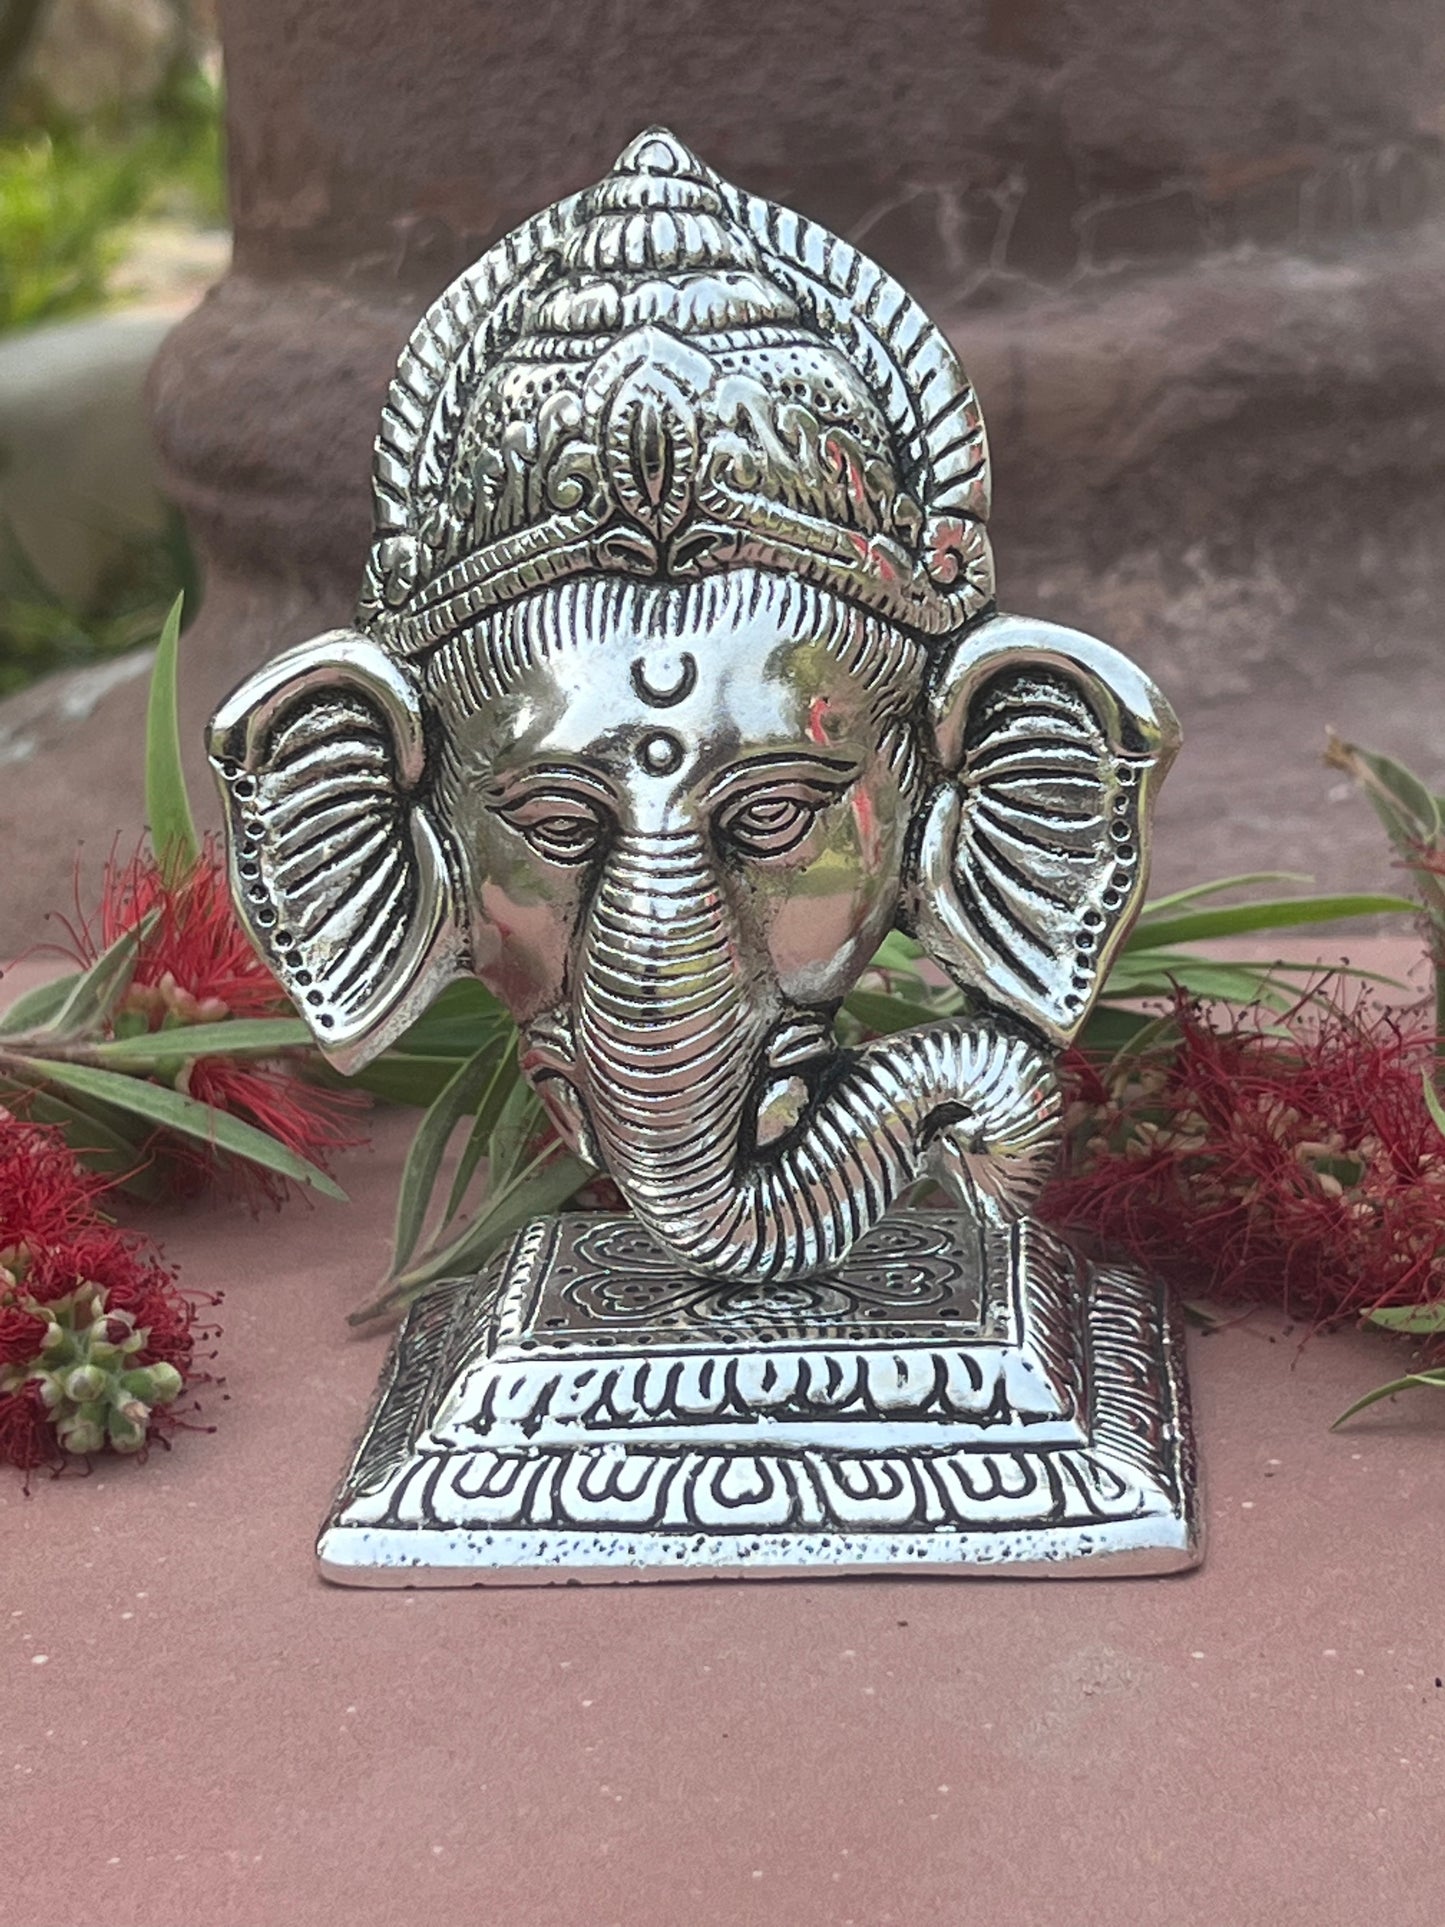 Image of Metal Stand With Ganesha Face  The Source India is an Indian Handicraft, Home Decor, Furnishing and Textiles Store. Based out of Hauz Khas Village New Delhi, each piece is carefully procured to allow the enhancement of India's Culture.